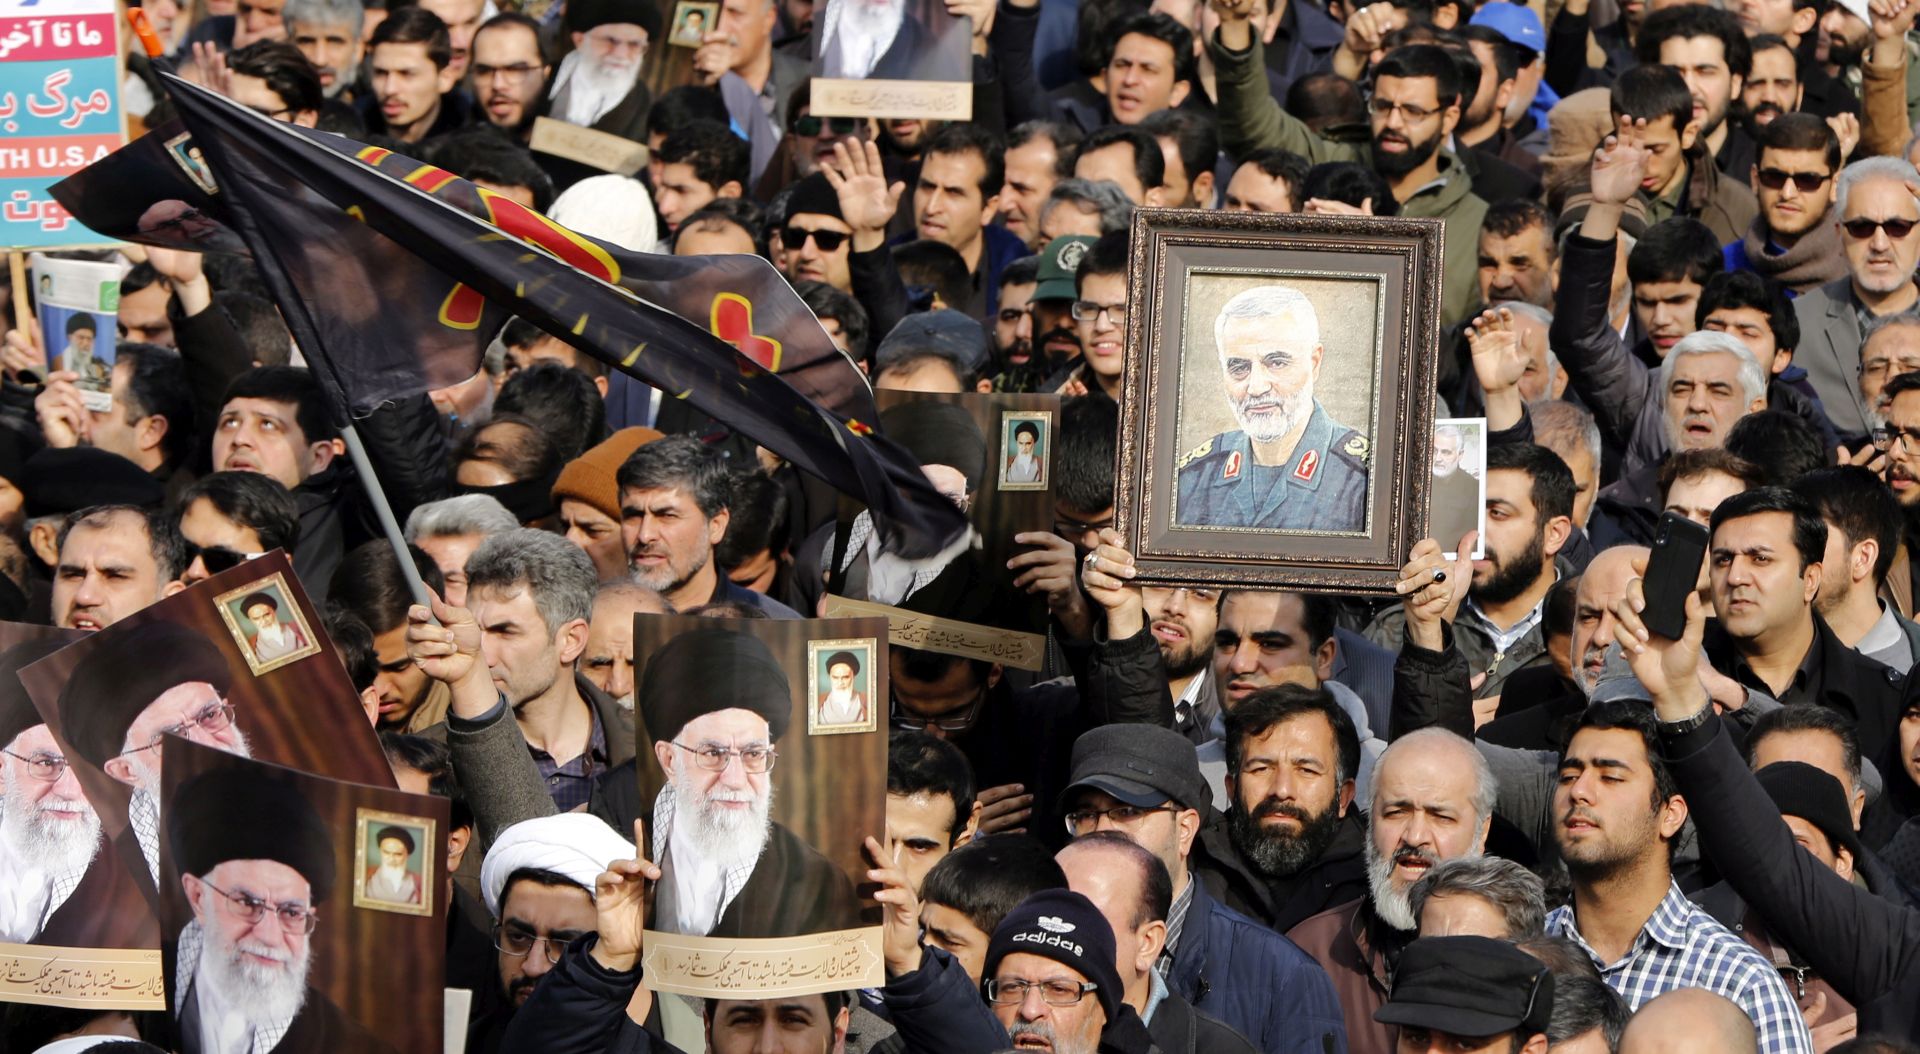 epa08099832 Iranians holding pictures of Supreme Leader Ali Khamenei and of Iranian Revolutionary Guards Corps (IRGC) Lieutenant general and commander of the Quds Force Qasem Soleimani take to the streets during an anti-US demonstration to condemn the killing of Soleimani, after Friday prayers in Tehran, Iran, 03 January 2020. The Pentagon announced that Iran's Quds Force leader Qasem Soleimani and Iraqi militia commander Abu Mahdi al-Muhandis were killed on 03 January 2020 following a US airstrike at Baghdad's international airport. The attack comes amid escalating tensions between Tehran and Washington.  EPA/ABEDIN TAHERKENAREH